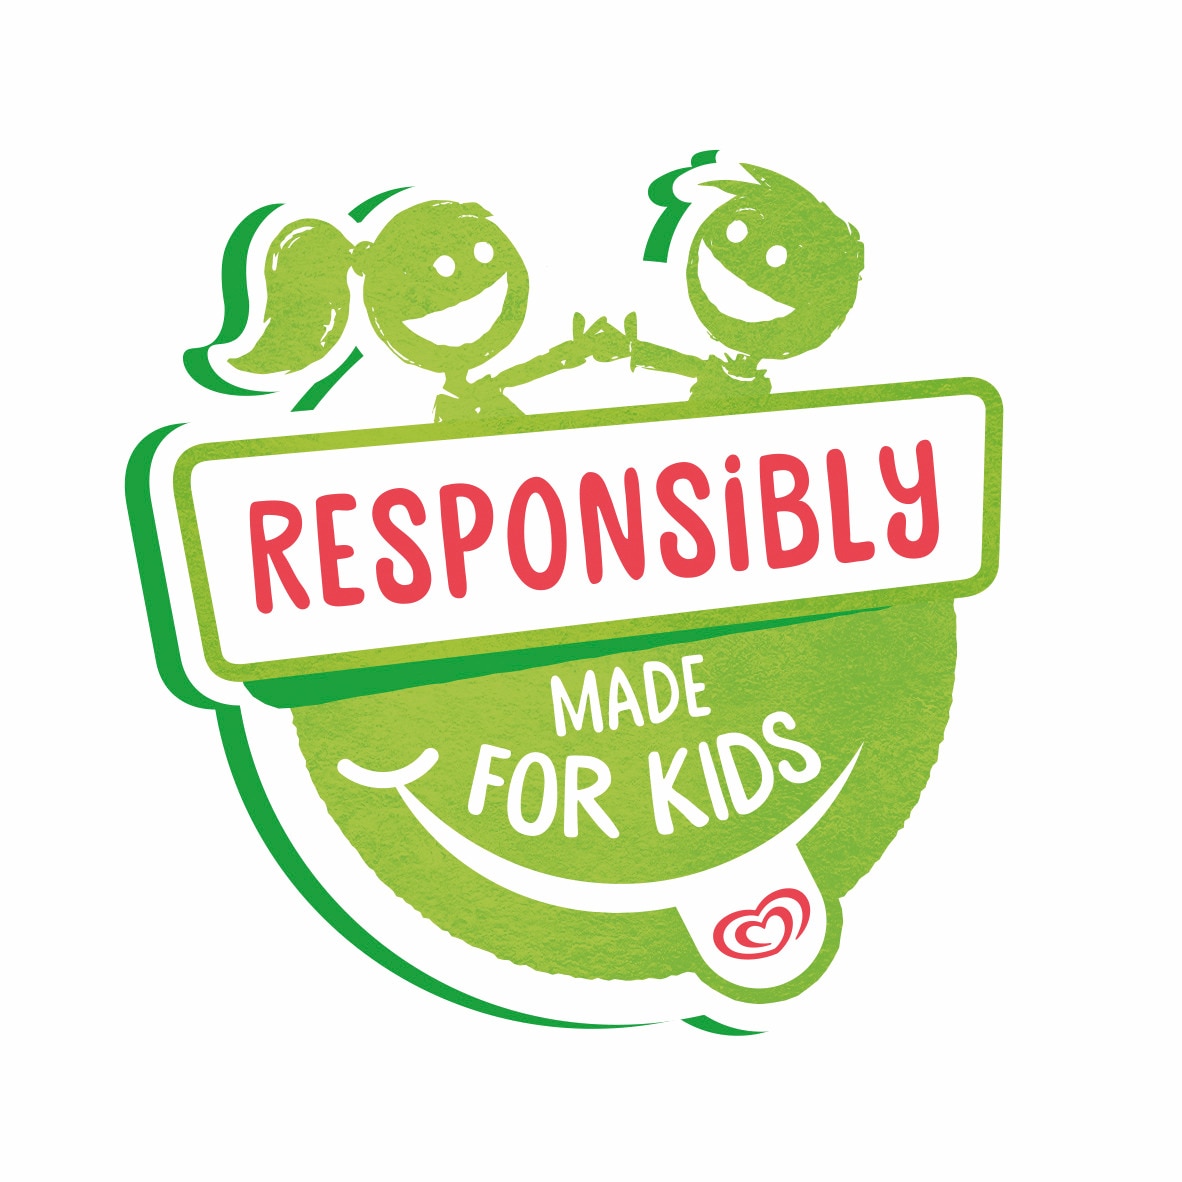 Responsibly made for kids